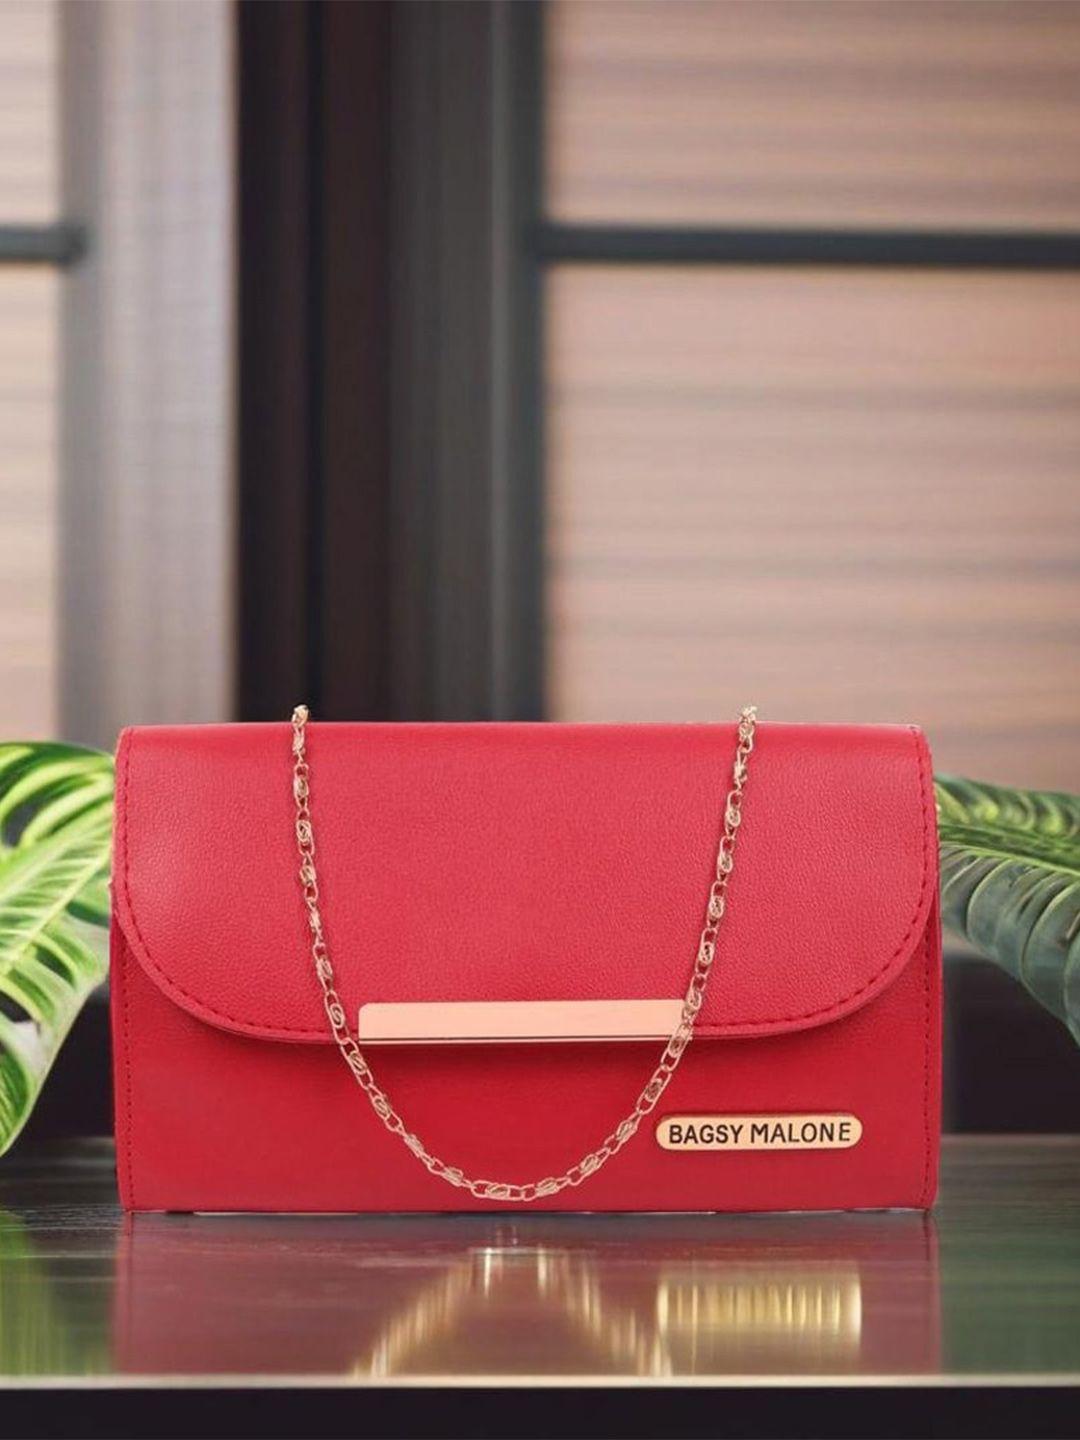 bagsy malone red envelope clutch